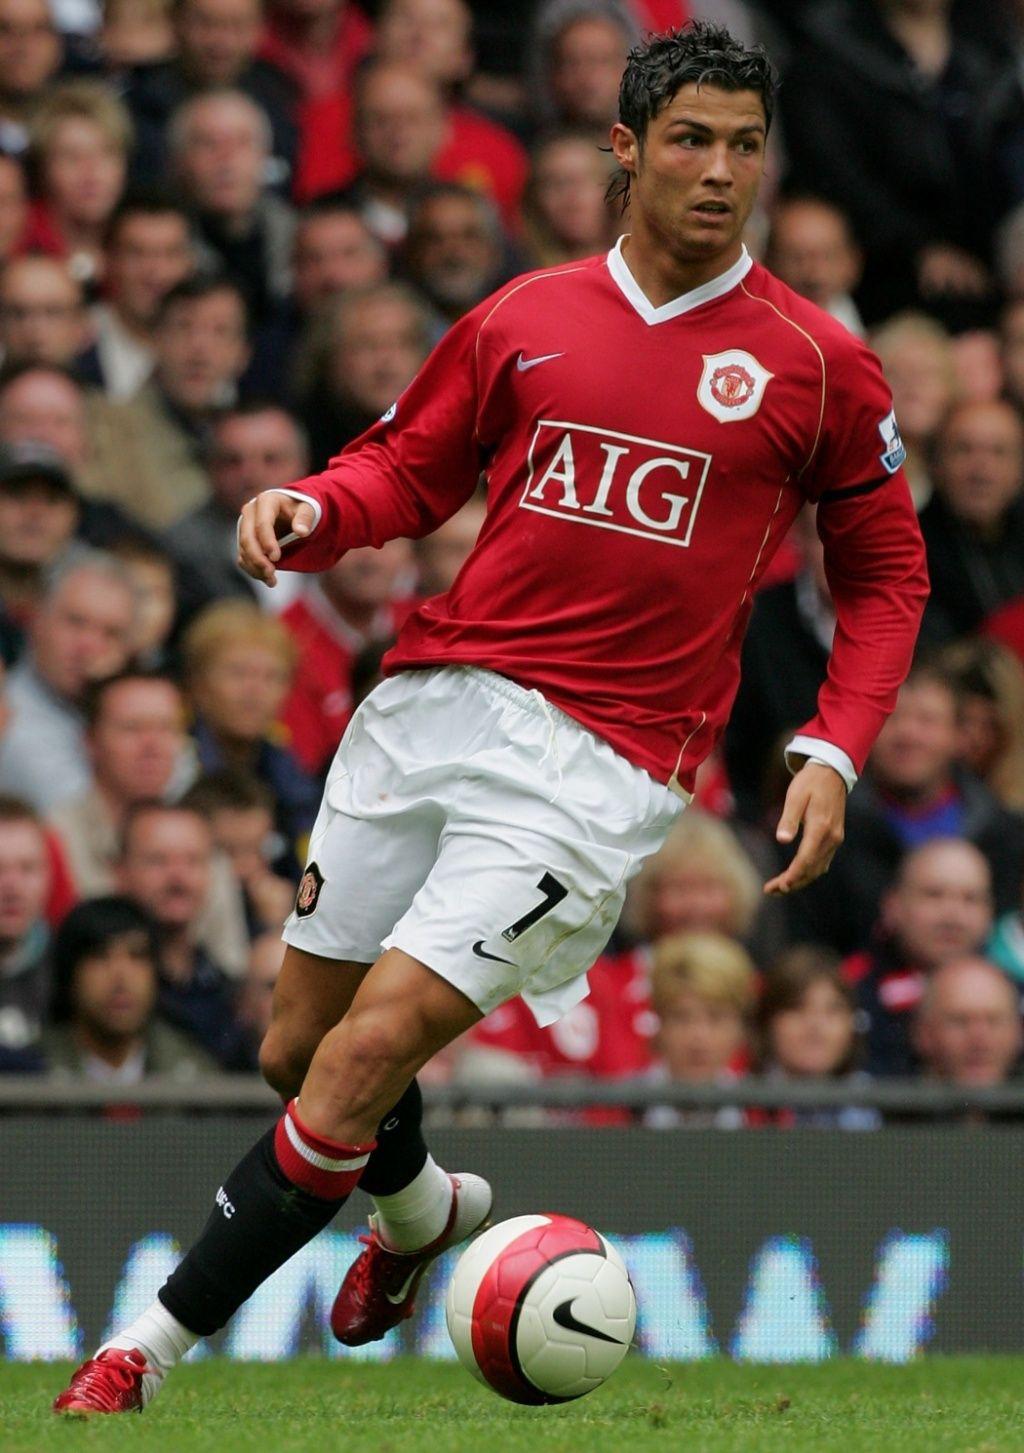 Cristiano Ronaldo Manchester United Wallpapers - Top Free ...